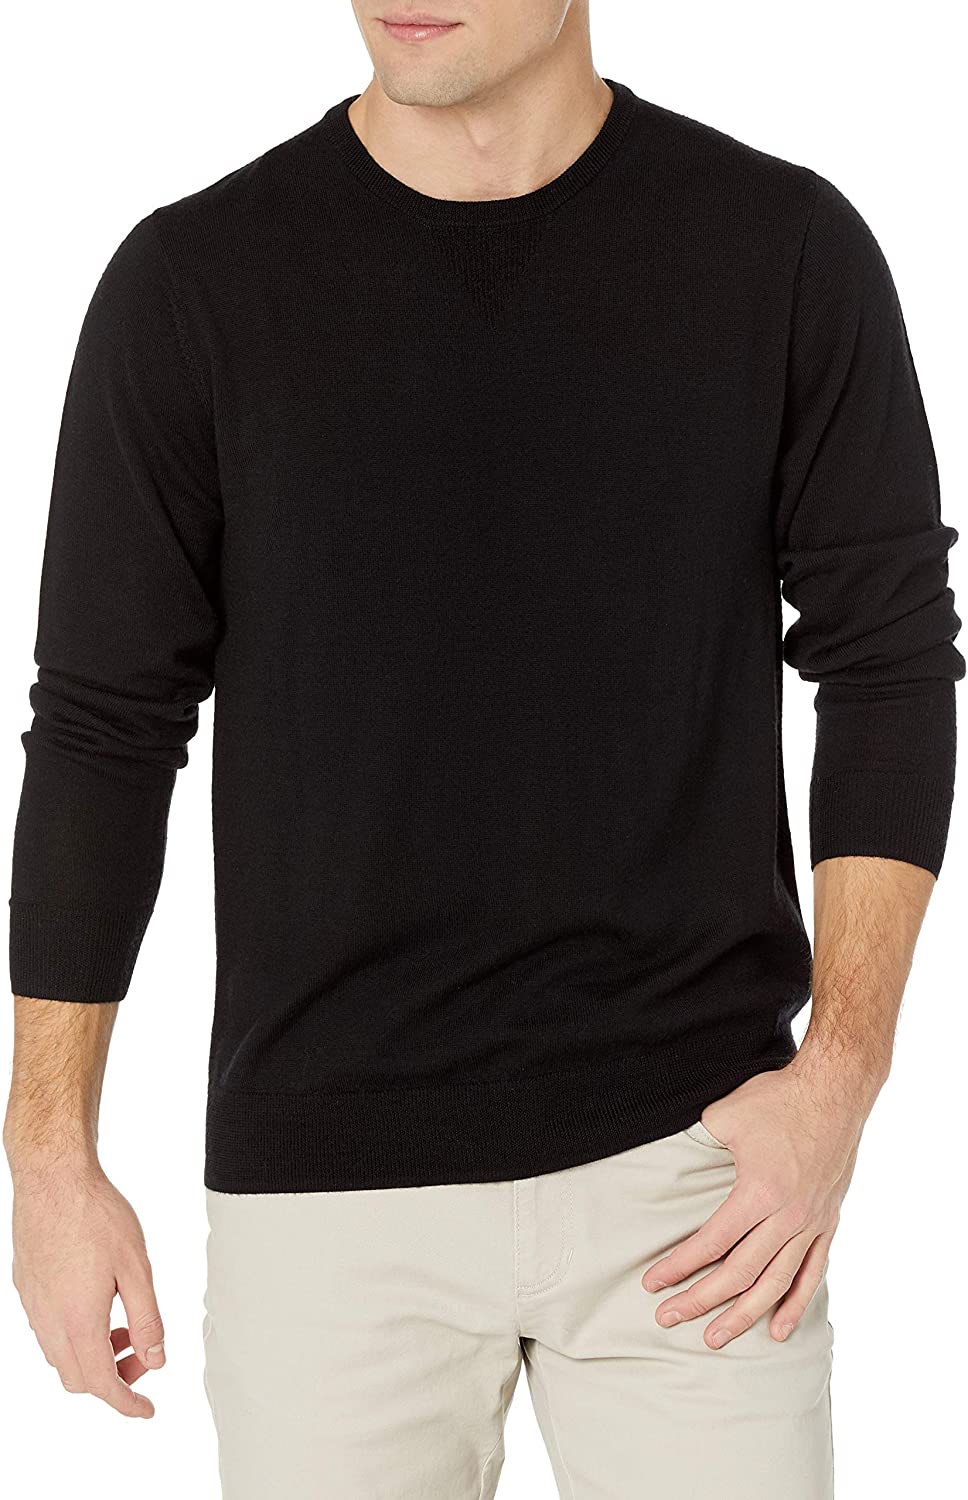 Merino Wool Sweater Mid Layer for Cold Weather